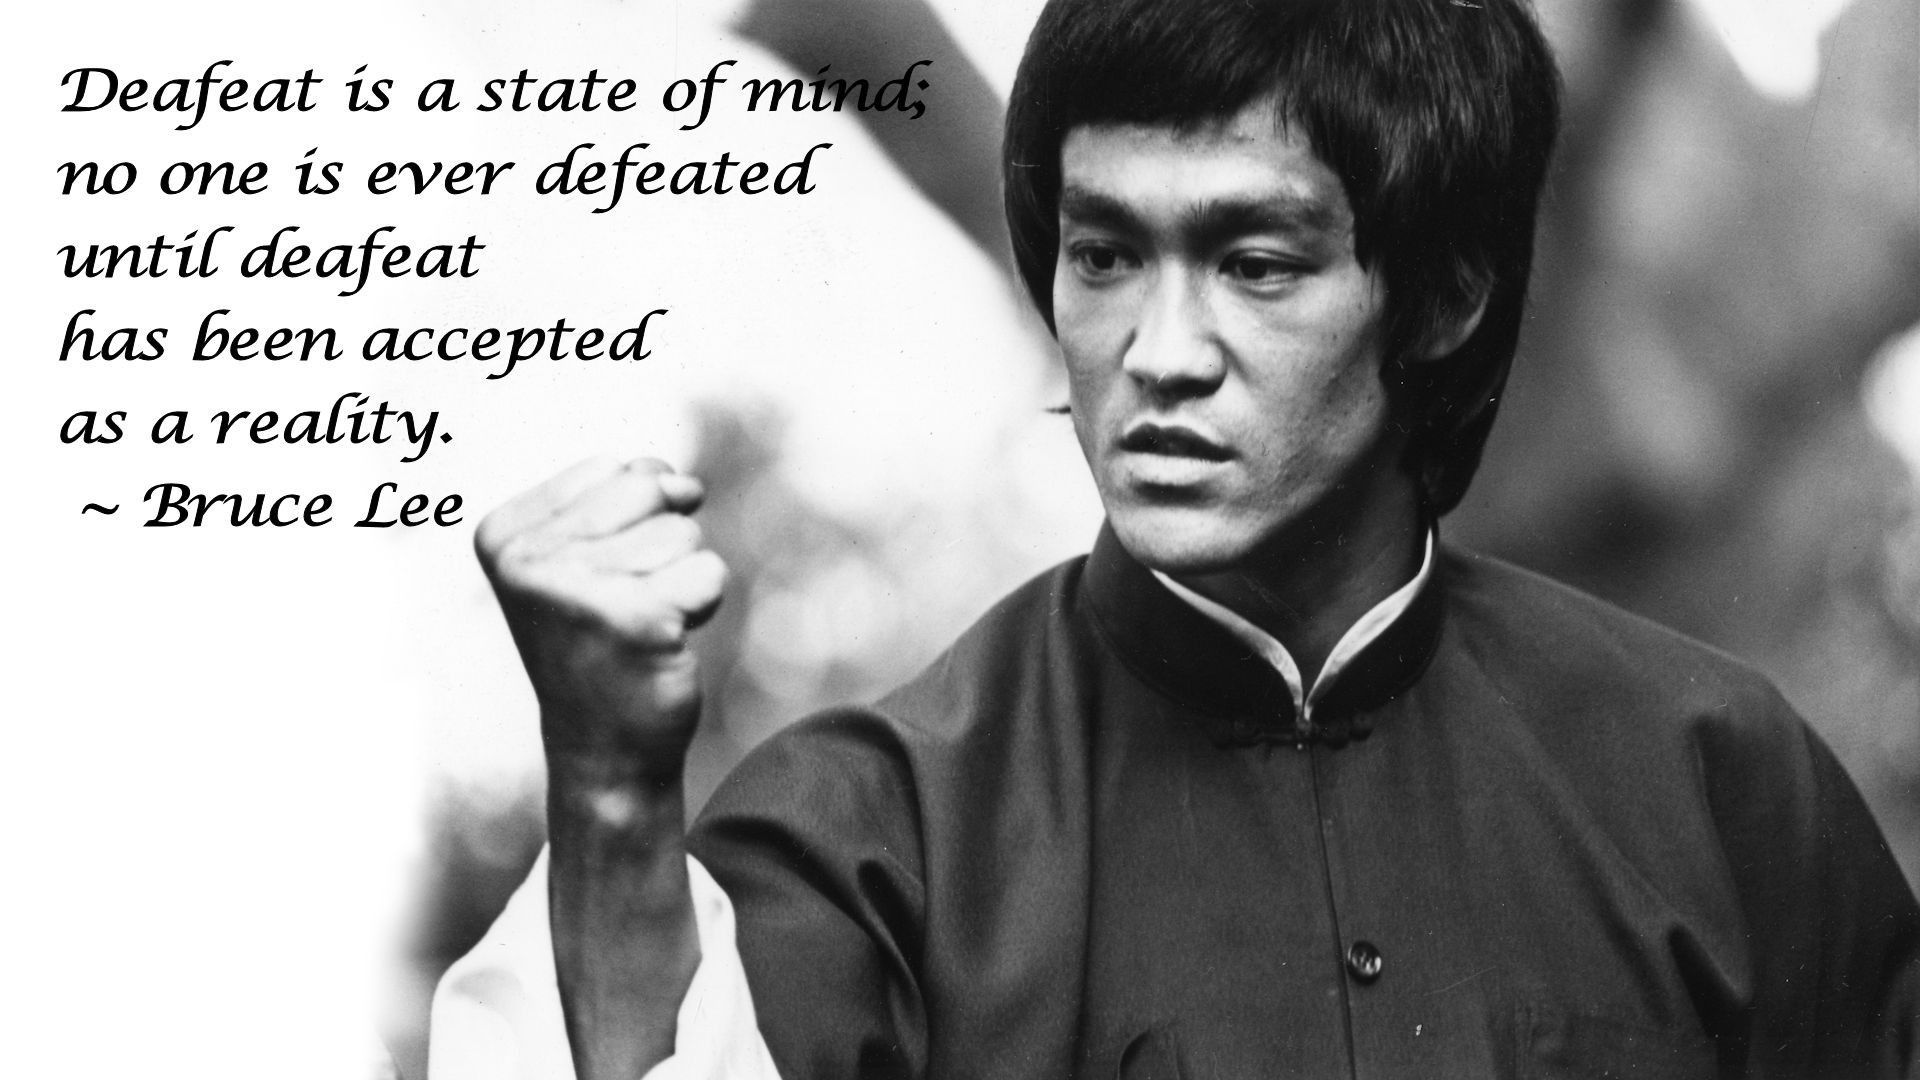 Bruce Lee defeat spelling error text typography wallpaper / Wallbase.cc. Bruce lee quotes, Bruce lee, Inspirational quotes